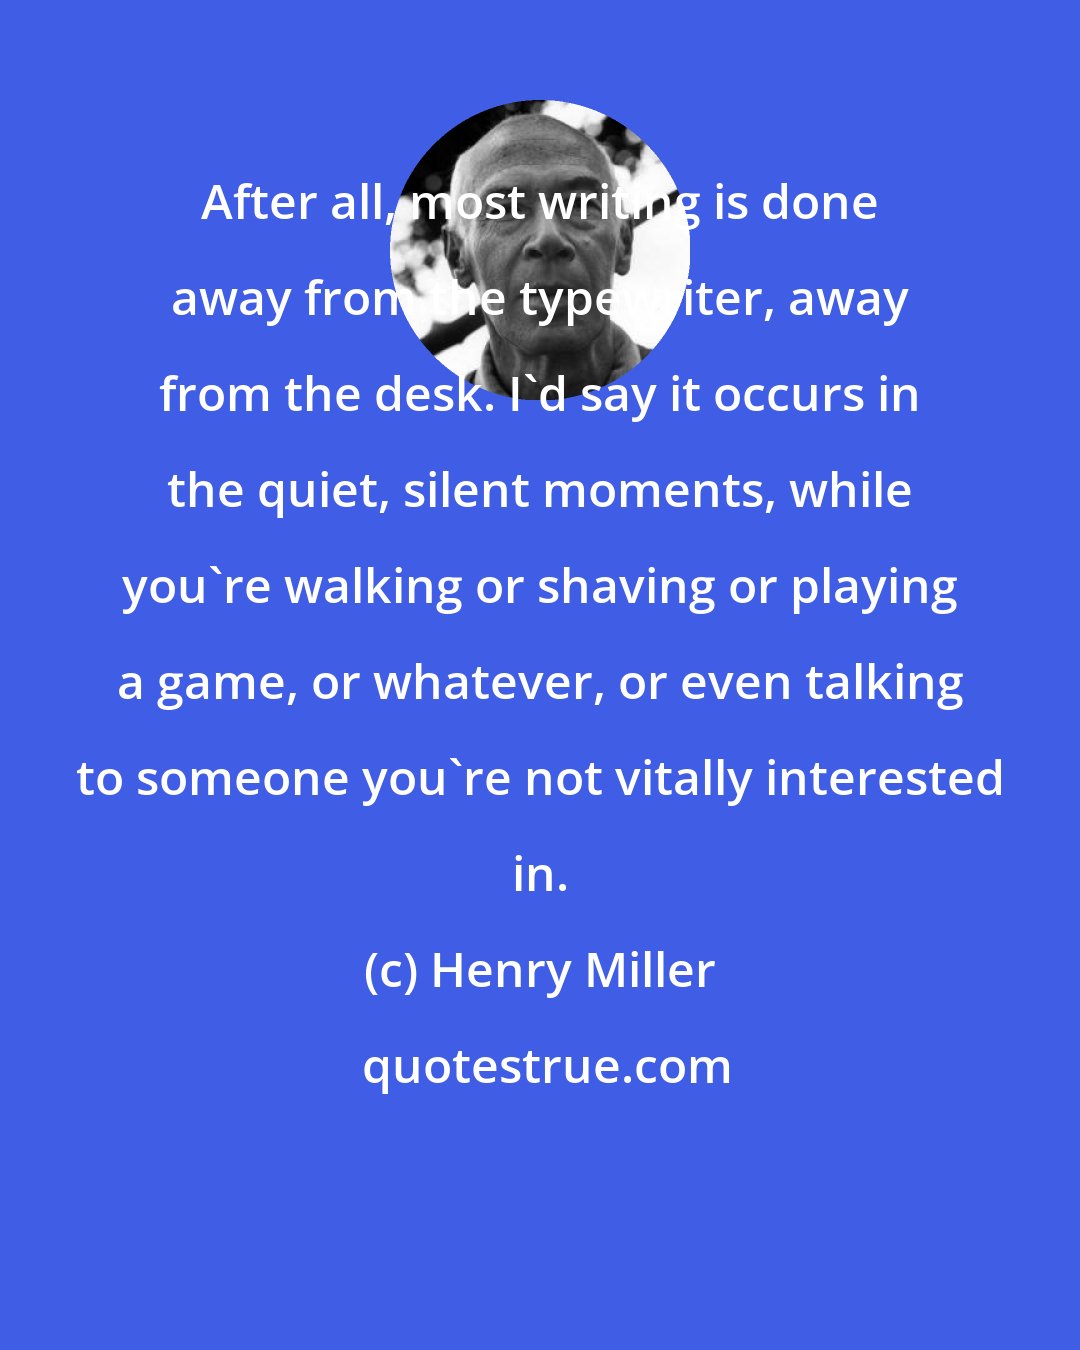 Henry Miller: After all, most writing is done away from the typewriter, away from the desk. I'd say it occurs in the quiet, silent moments, while you're walking or shaving or playing a game, or whatever, or even talking to someone you're not vitally interested in.